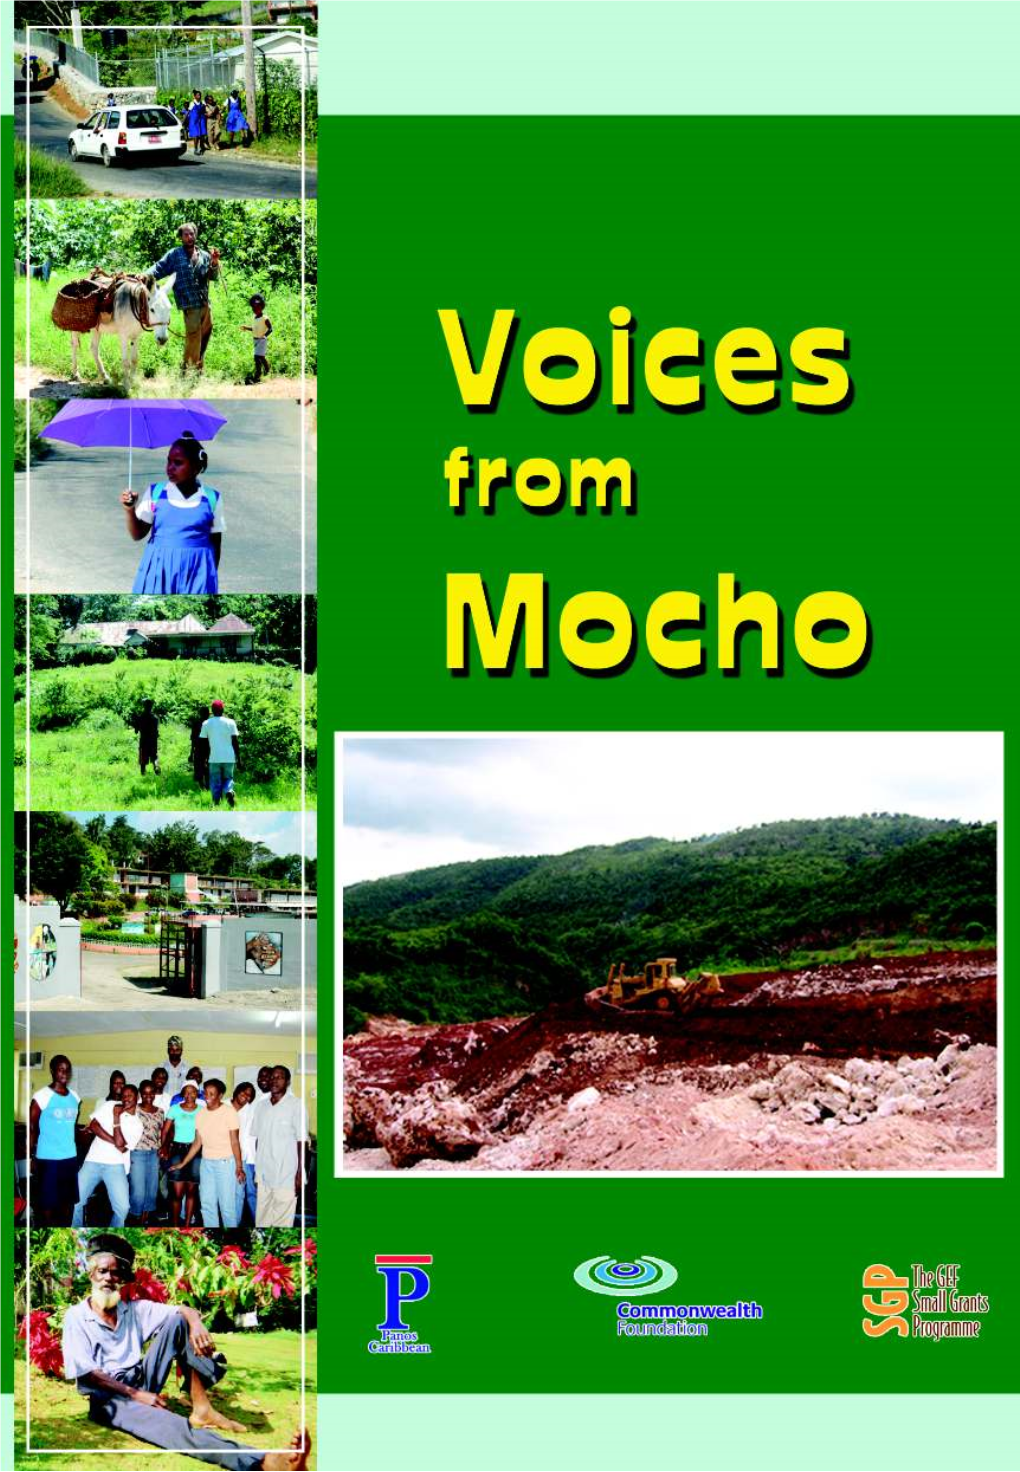 Voices from Mocho Panos Caribbean 9 Westminster Road, Kingston 10, Jamaica, W.I